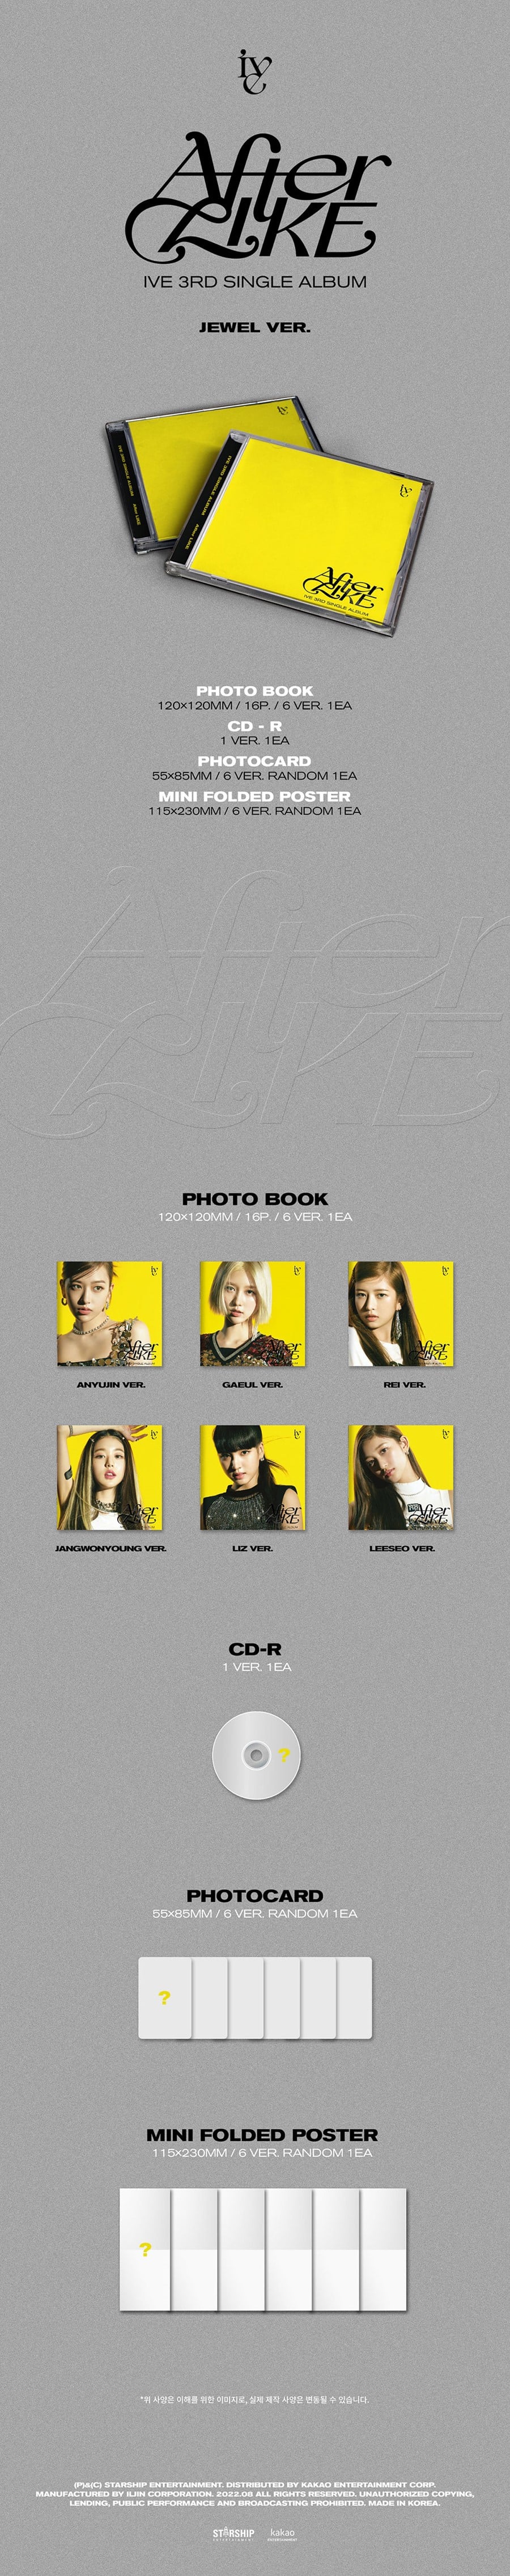 ive-3th-single-album-after-like-jewel-ver-limited-wholesales